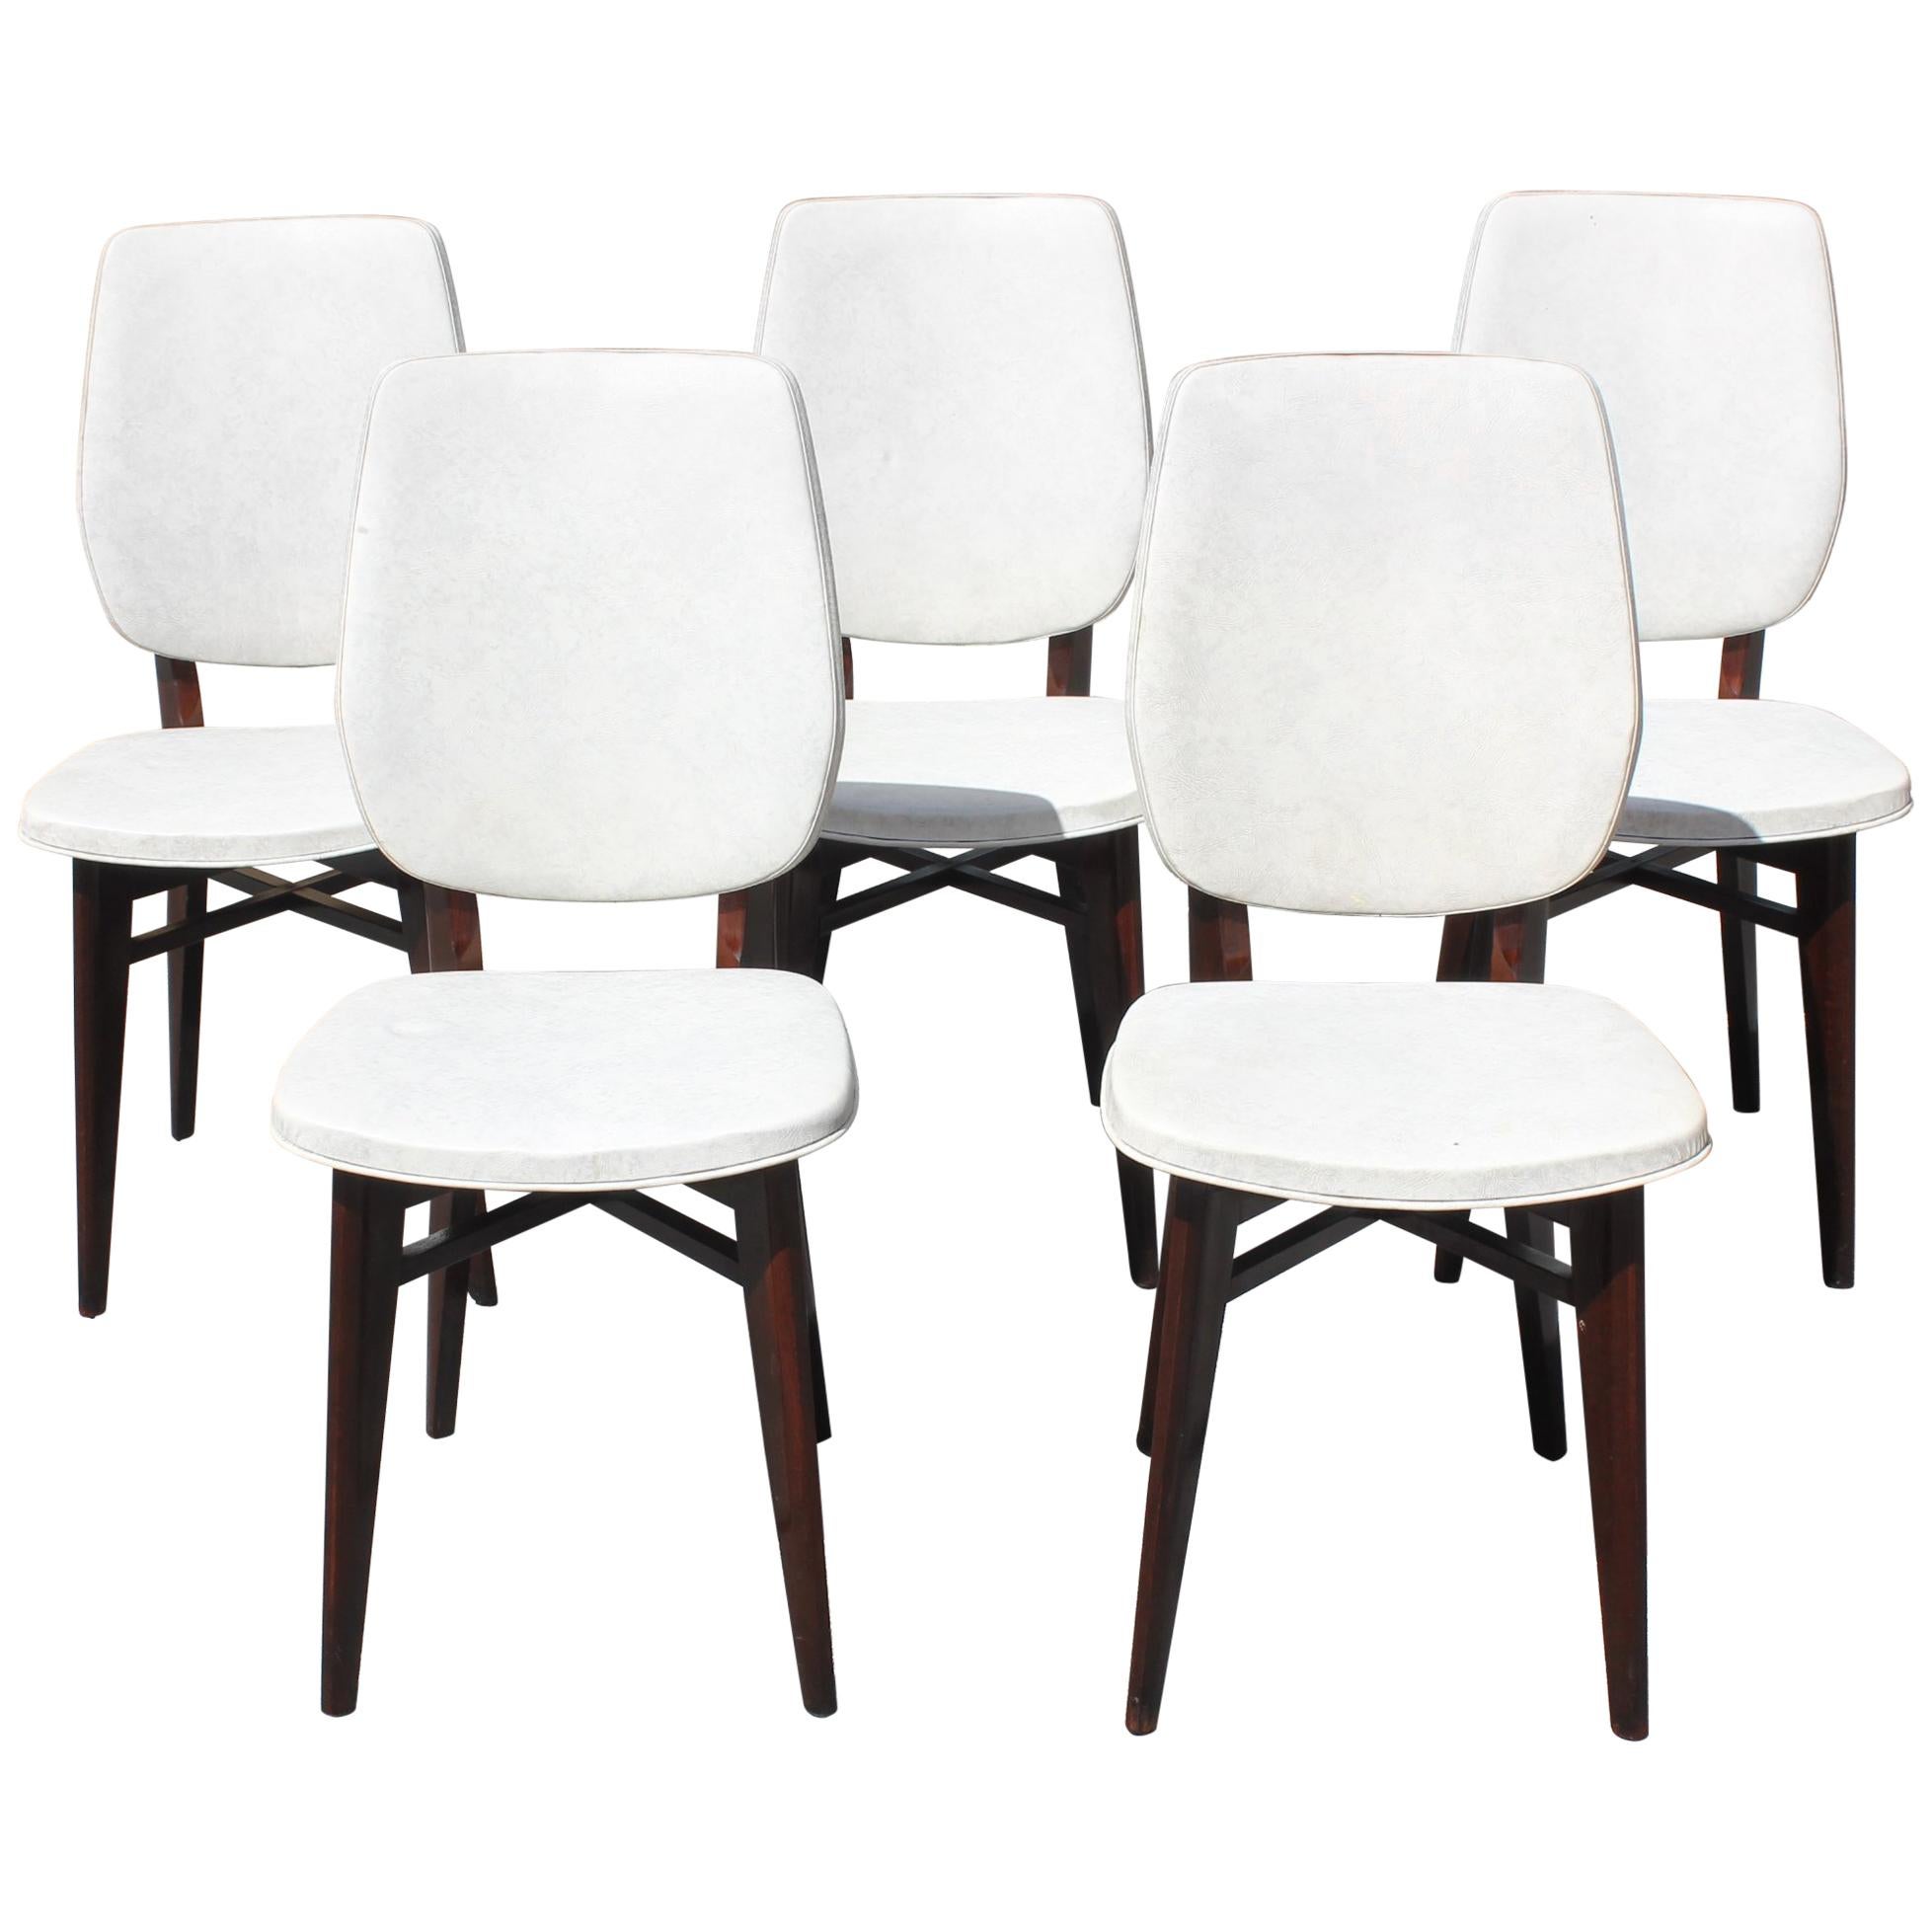 Beautiful Set of Five French Art Deco Solid Mahogany Dining Chairs, circa 1940s For Sale